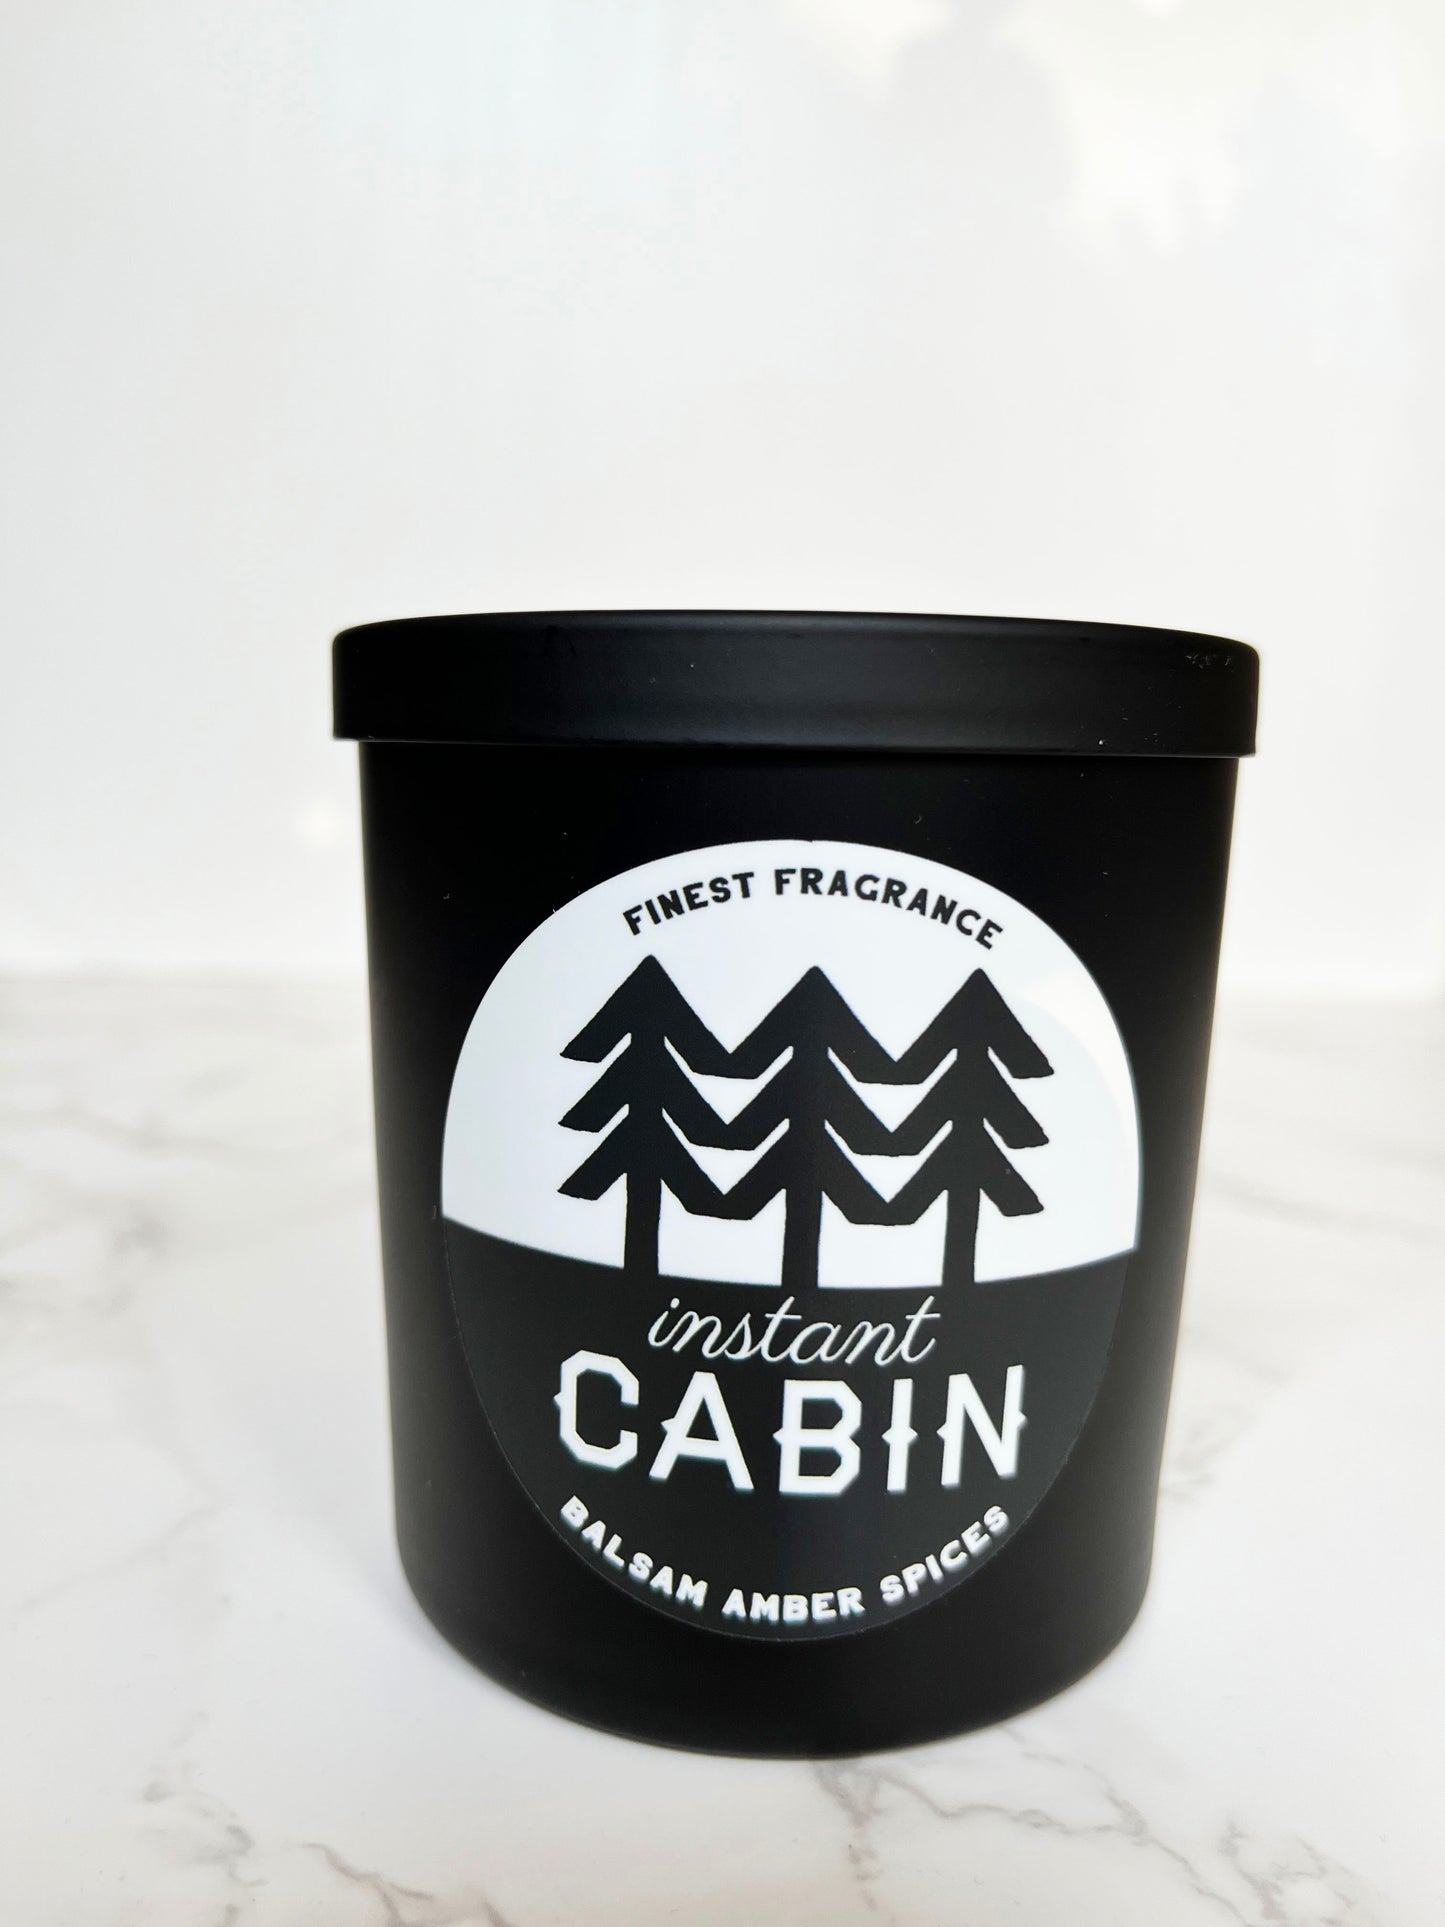 woodland modern trees winter pretty instant cabin candle in black jar modern chic earthy balsam amber cute cozy gift coin laundry